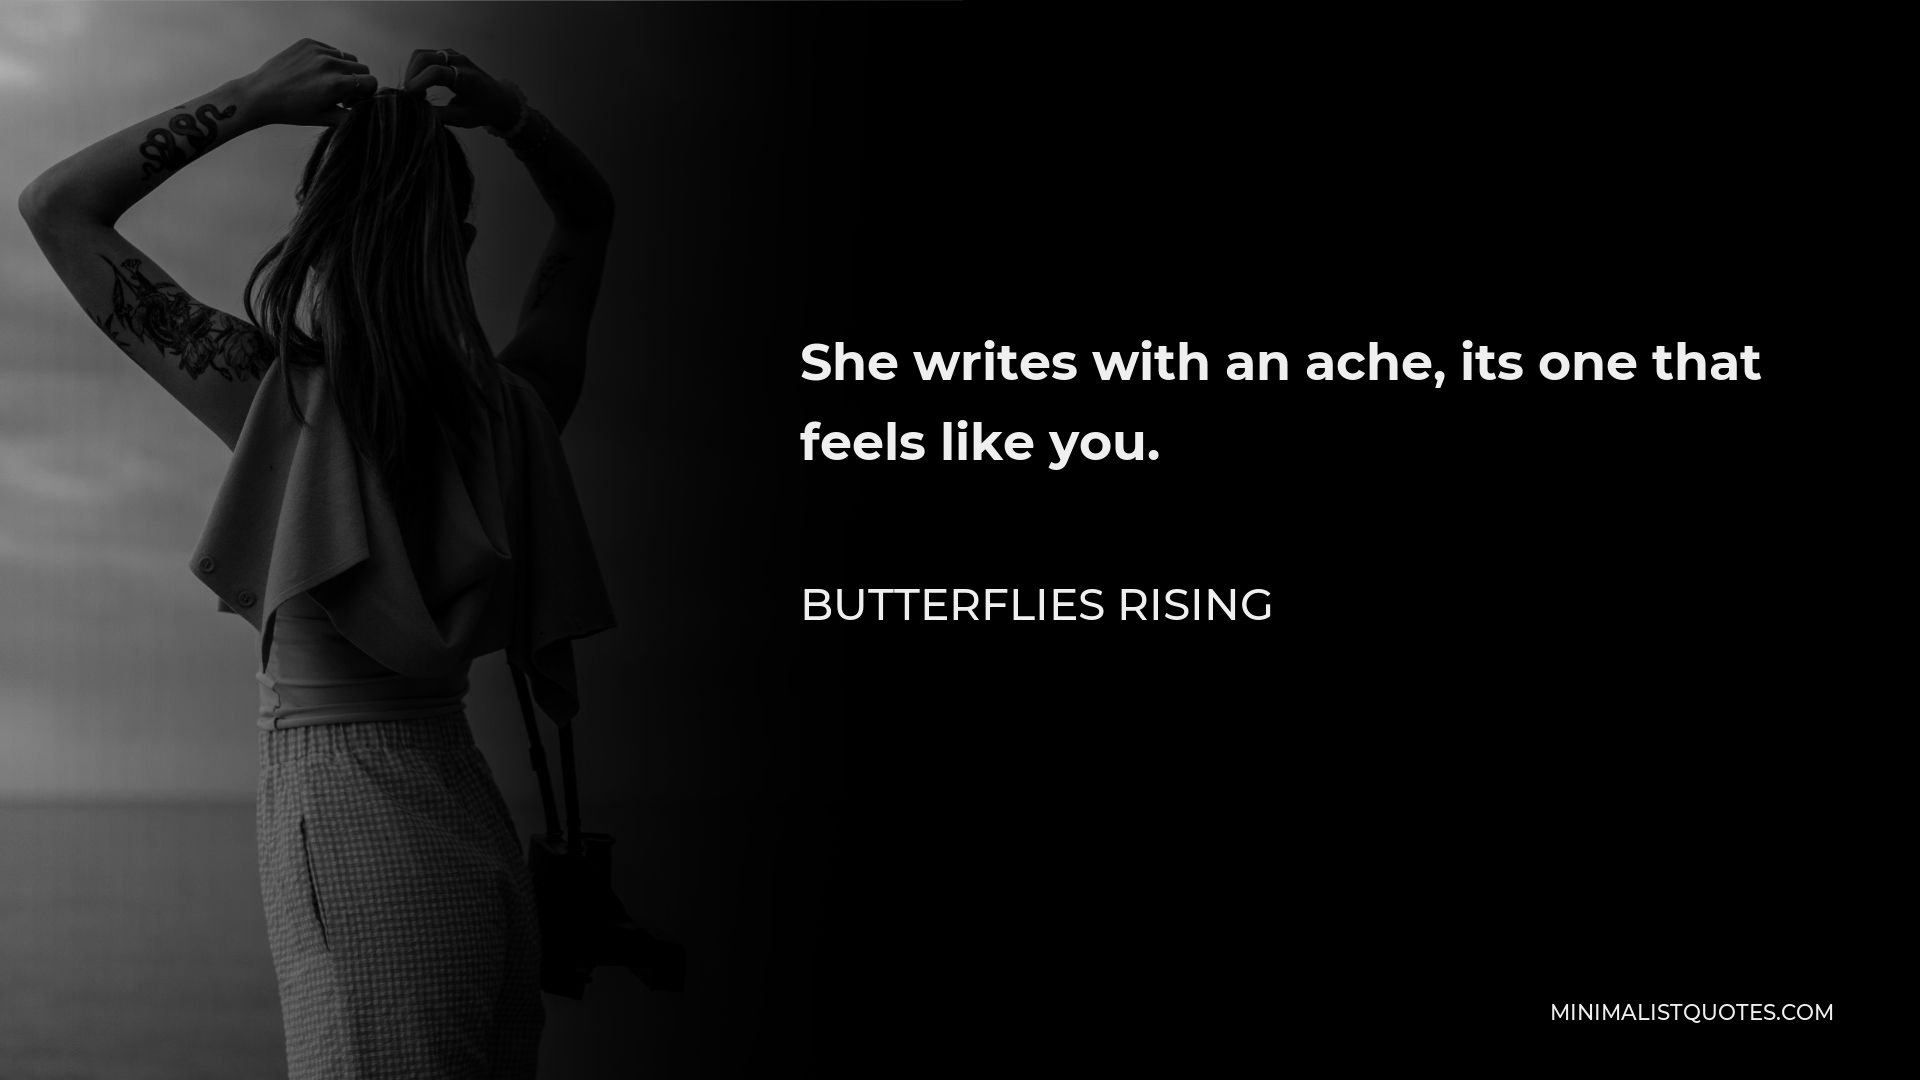 Butterflies Rising Quote - She writes with an ache, its one that feels like you.